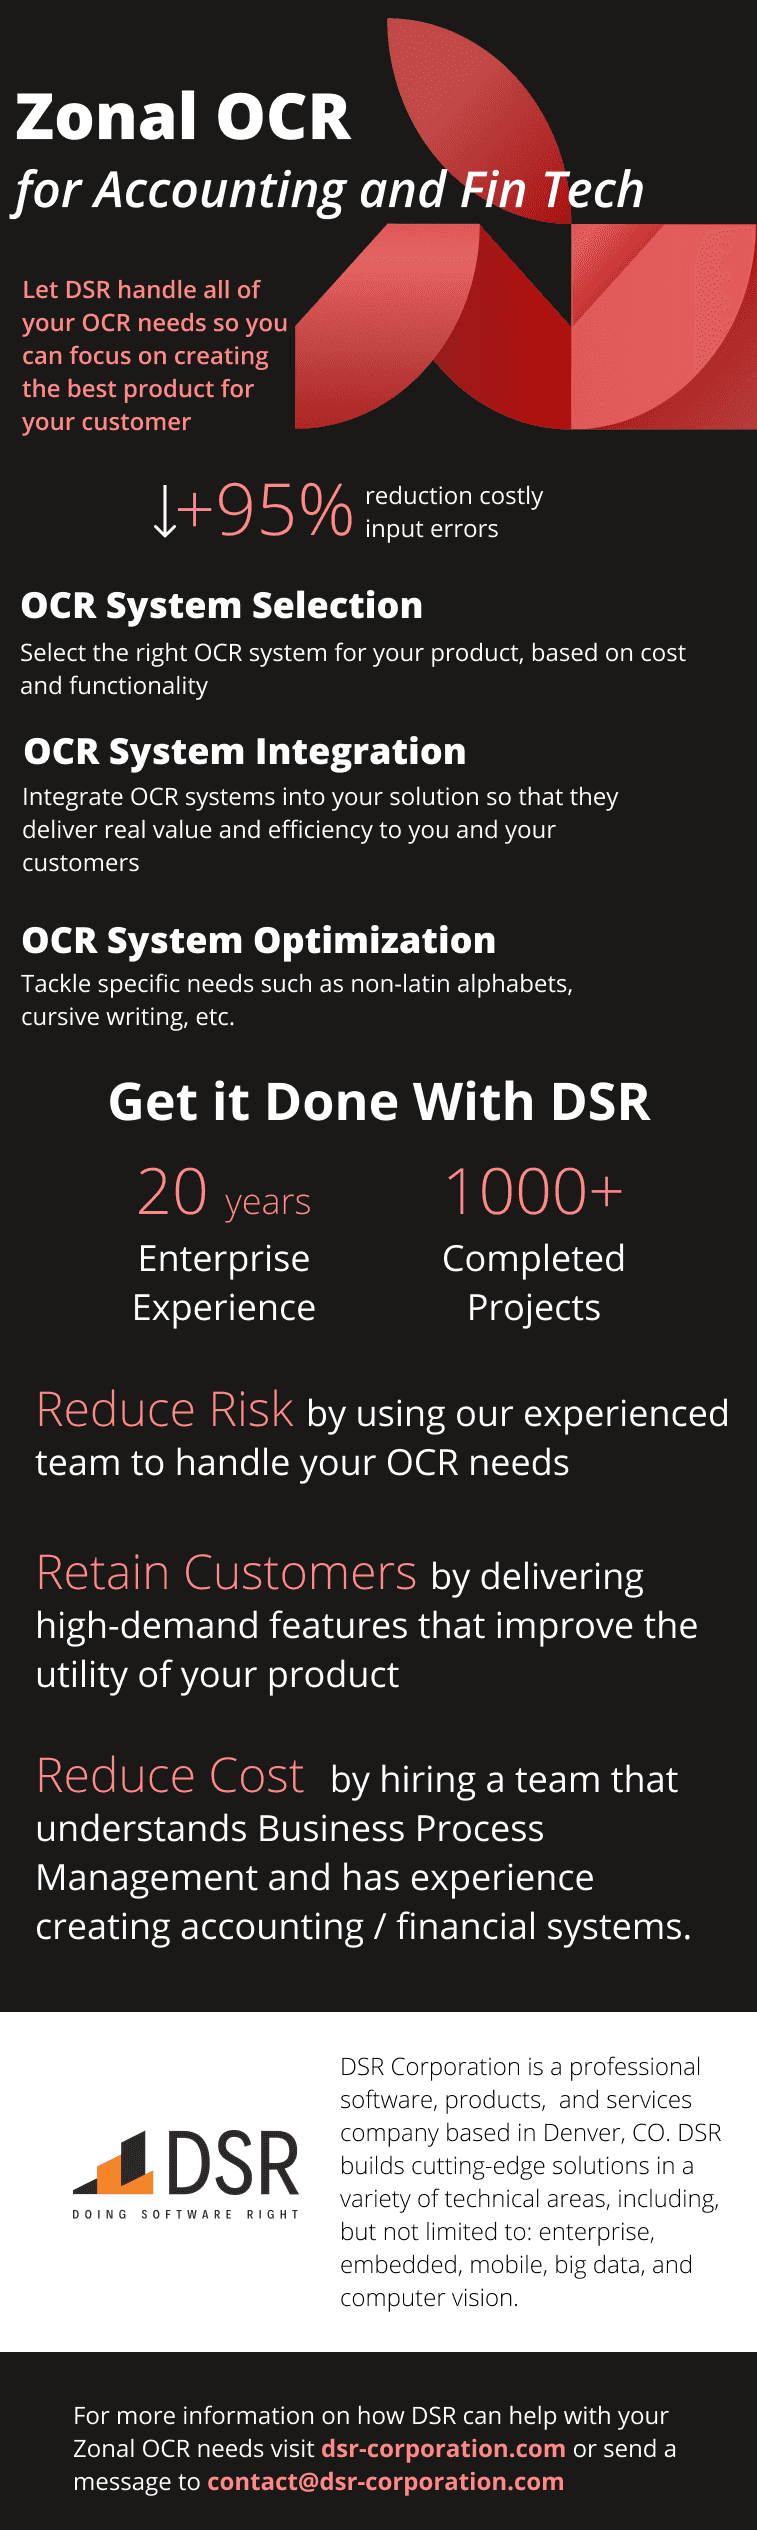 OCR resources from DSR one-page